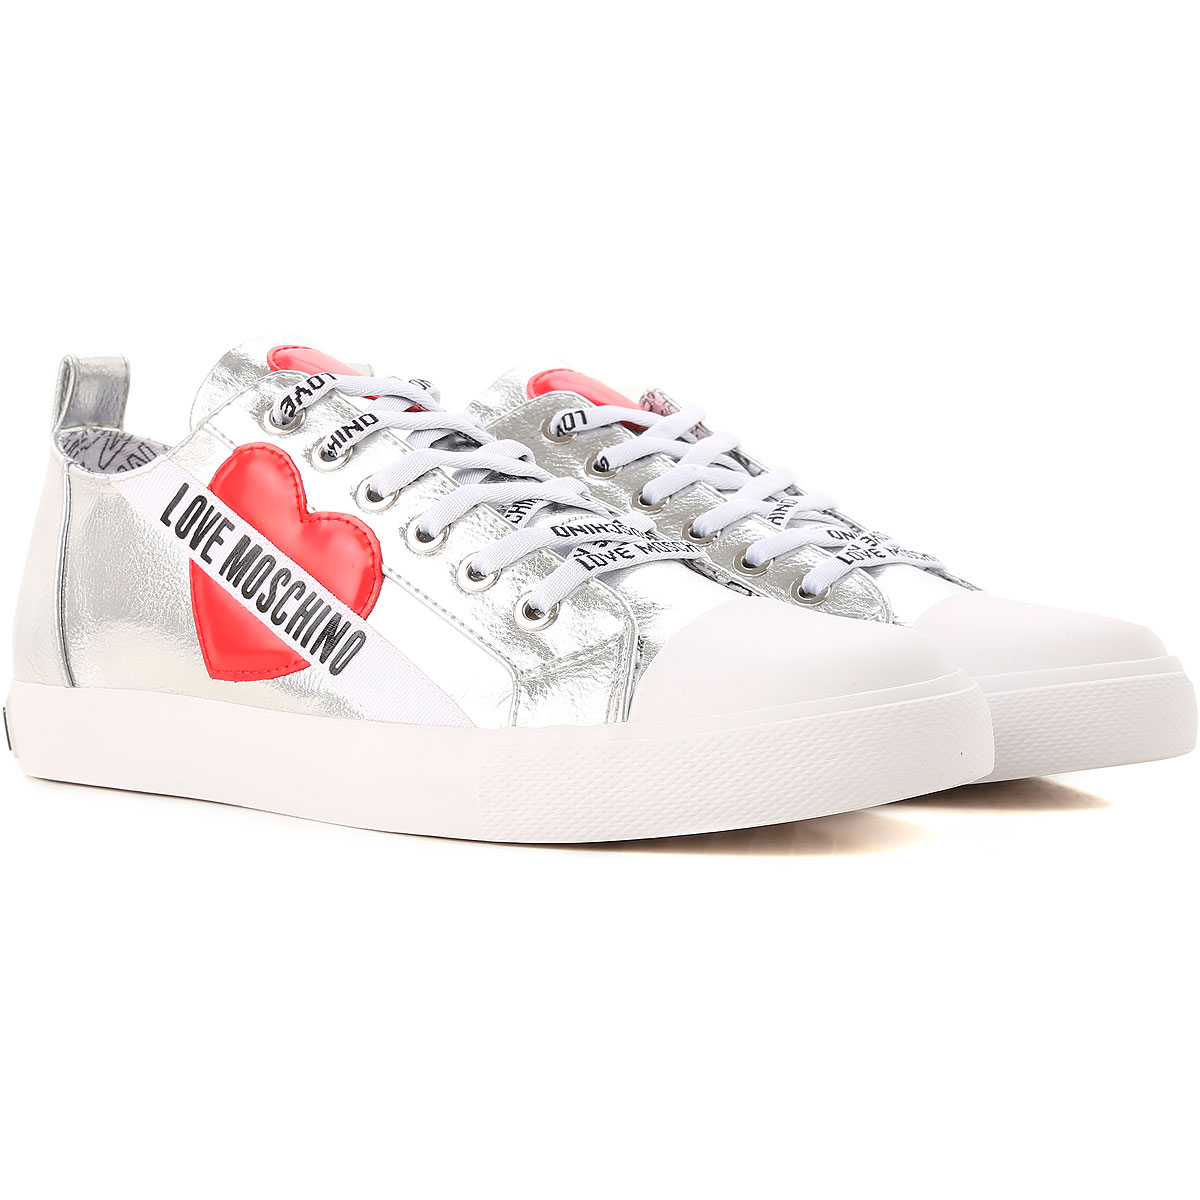 Womens Shoes Moschino, Style code ja15013g16ie0902